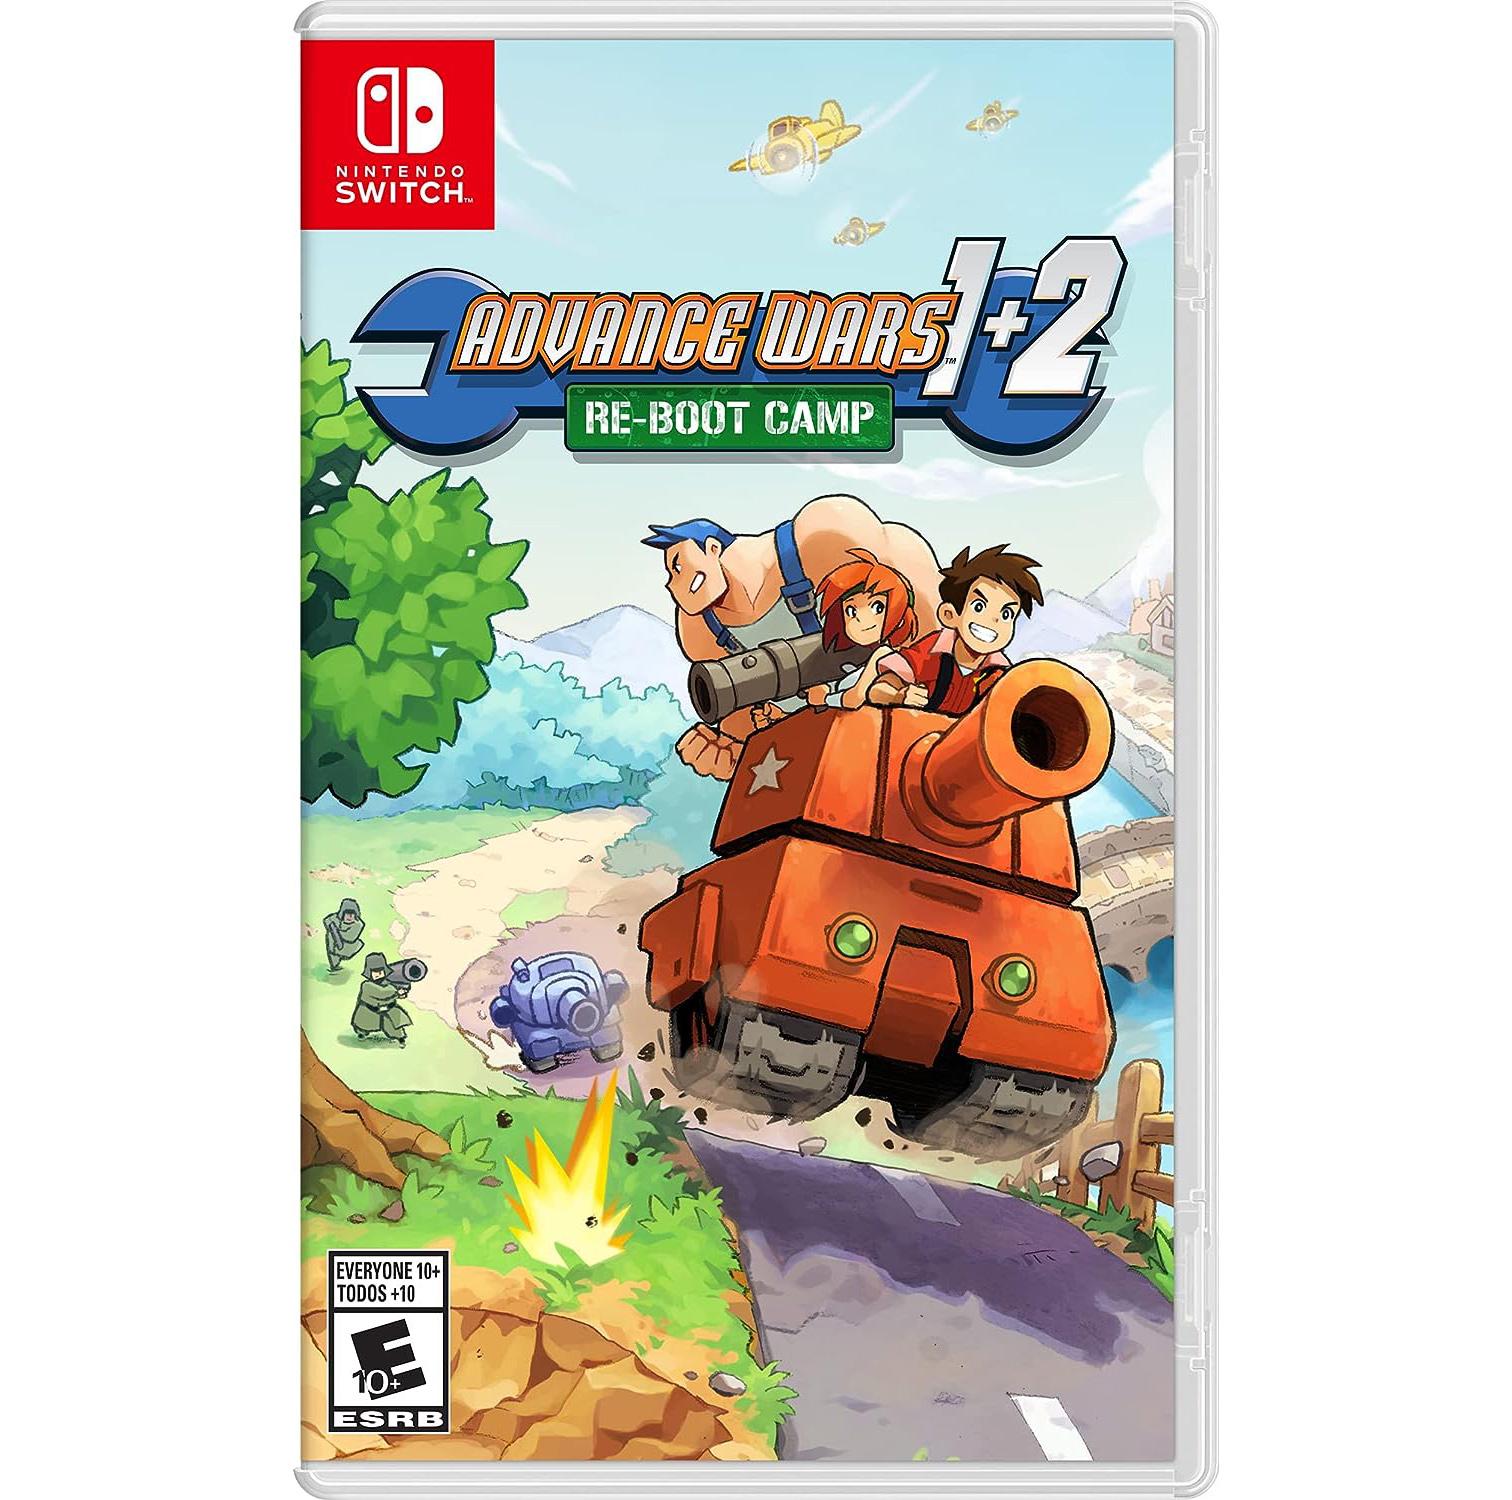 Advance Wars 1+2 Re-Boot Camp Nintendo Switch for $41.99 Shipped